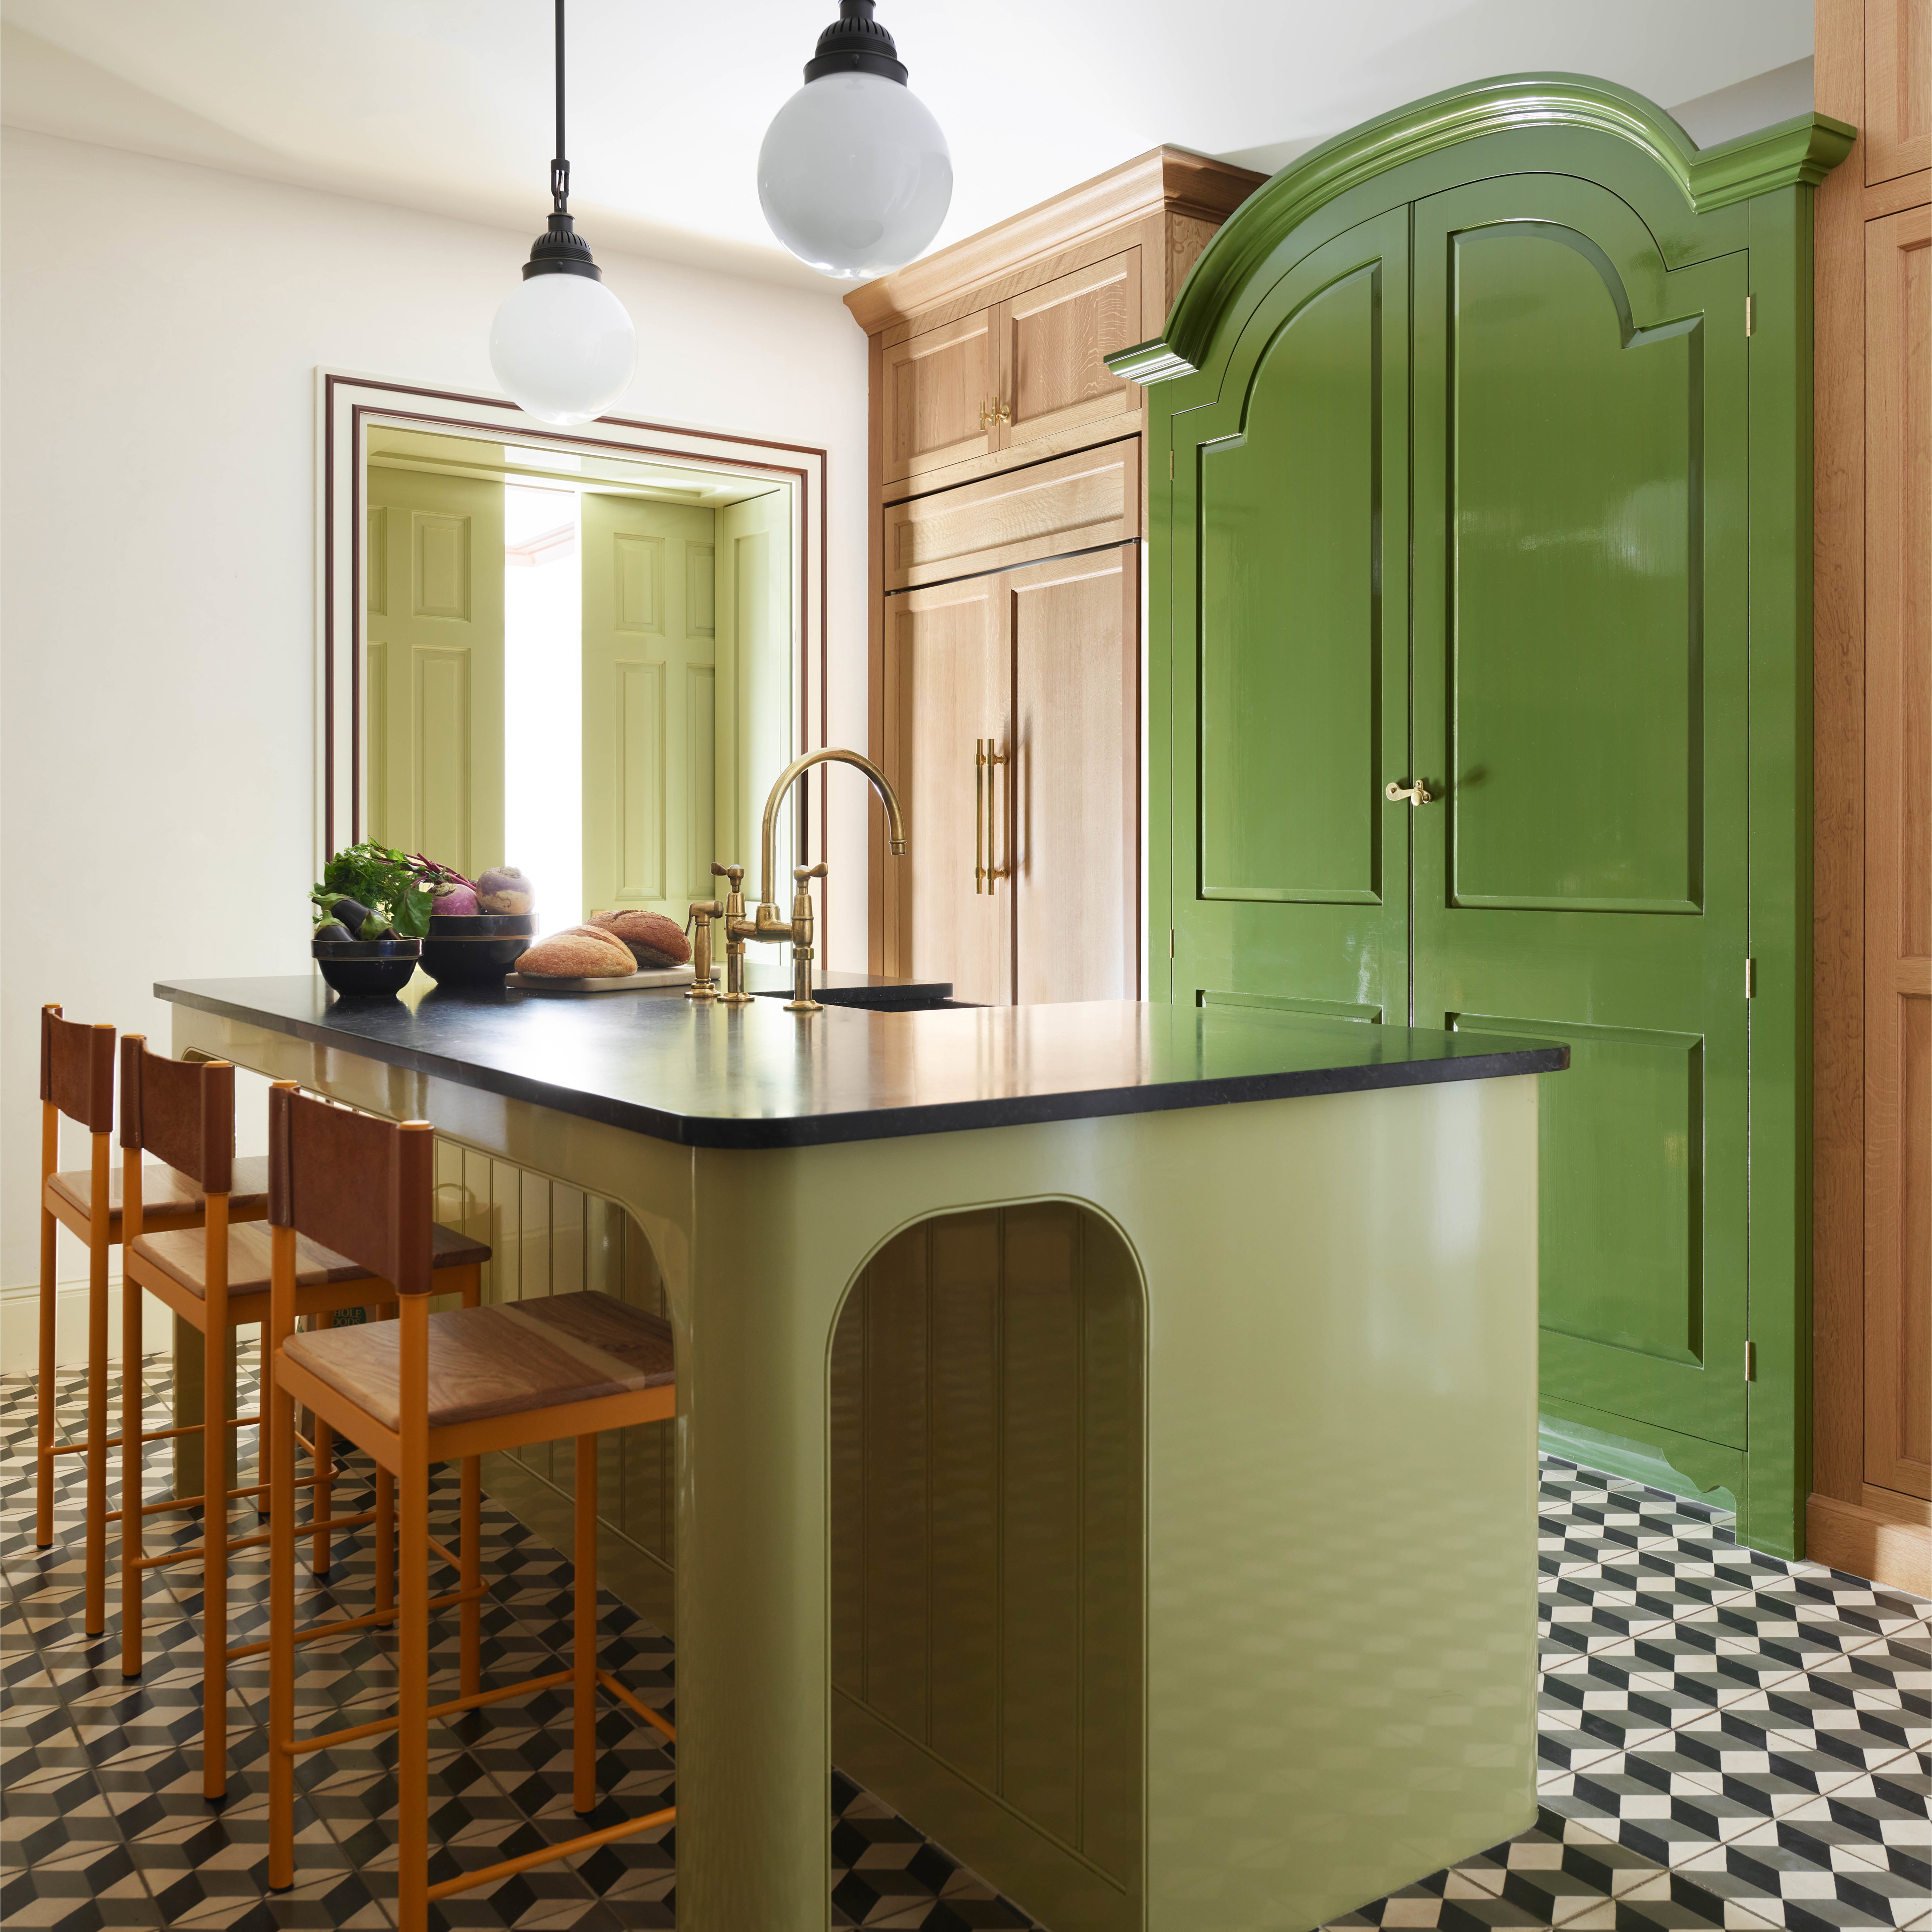 a kitchen with a checkered floor and green cabinets